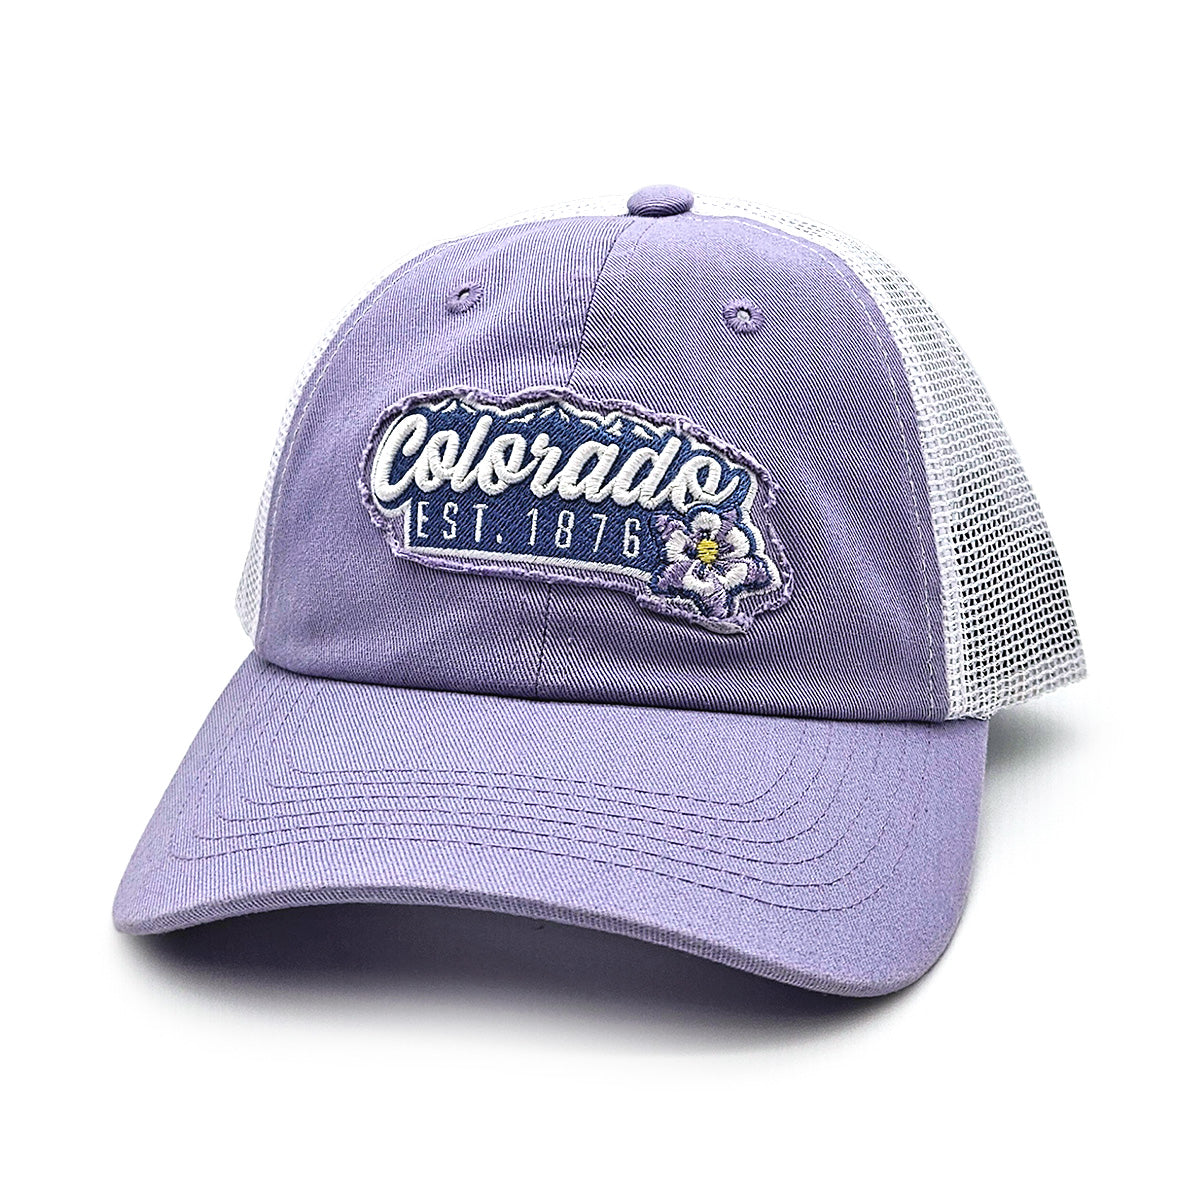 Mountain Bloom Hat - Unstructured - Purple/White